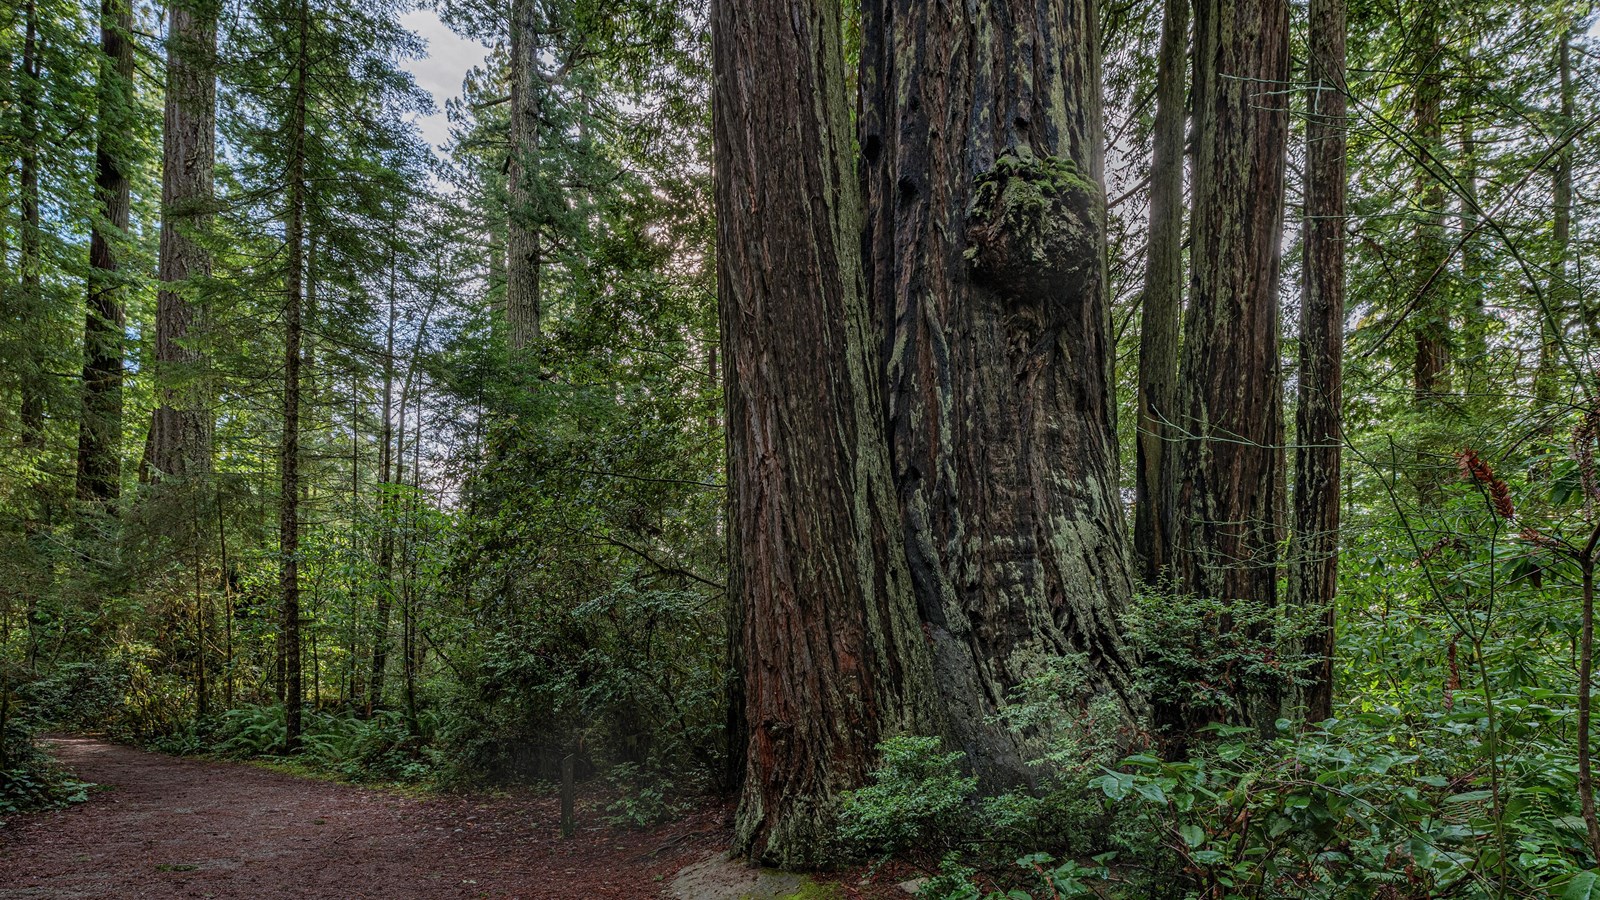 A redwood with many reiterations towers among green understory brush. 